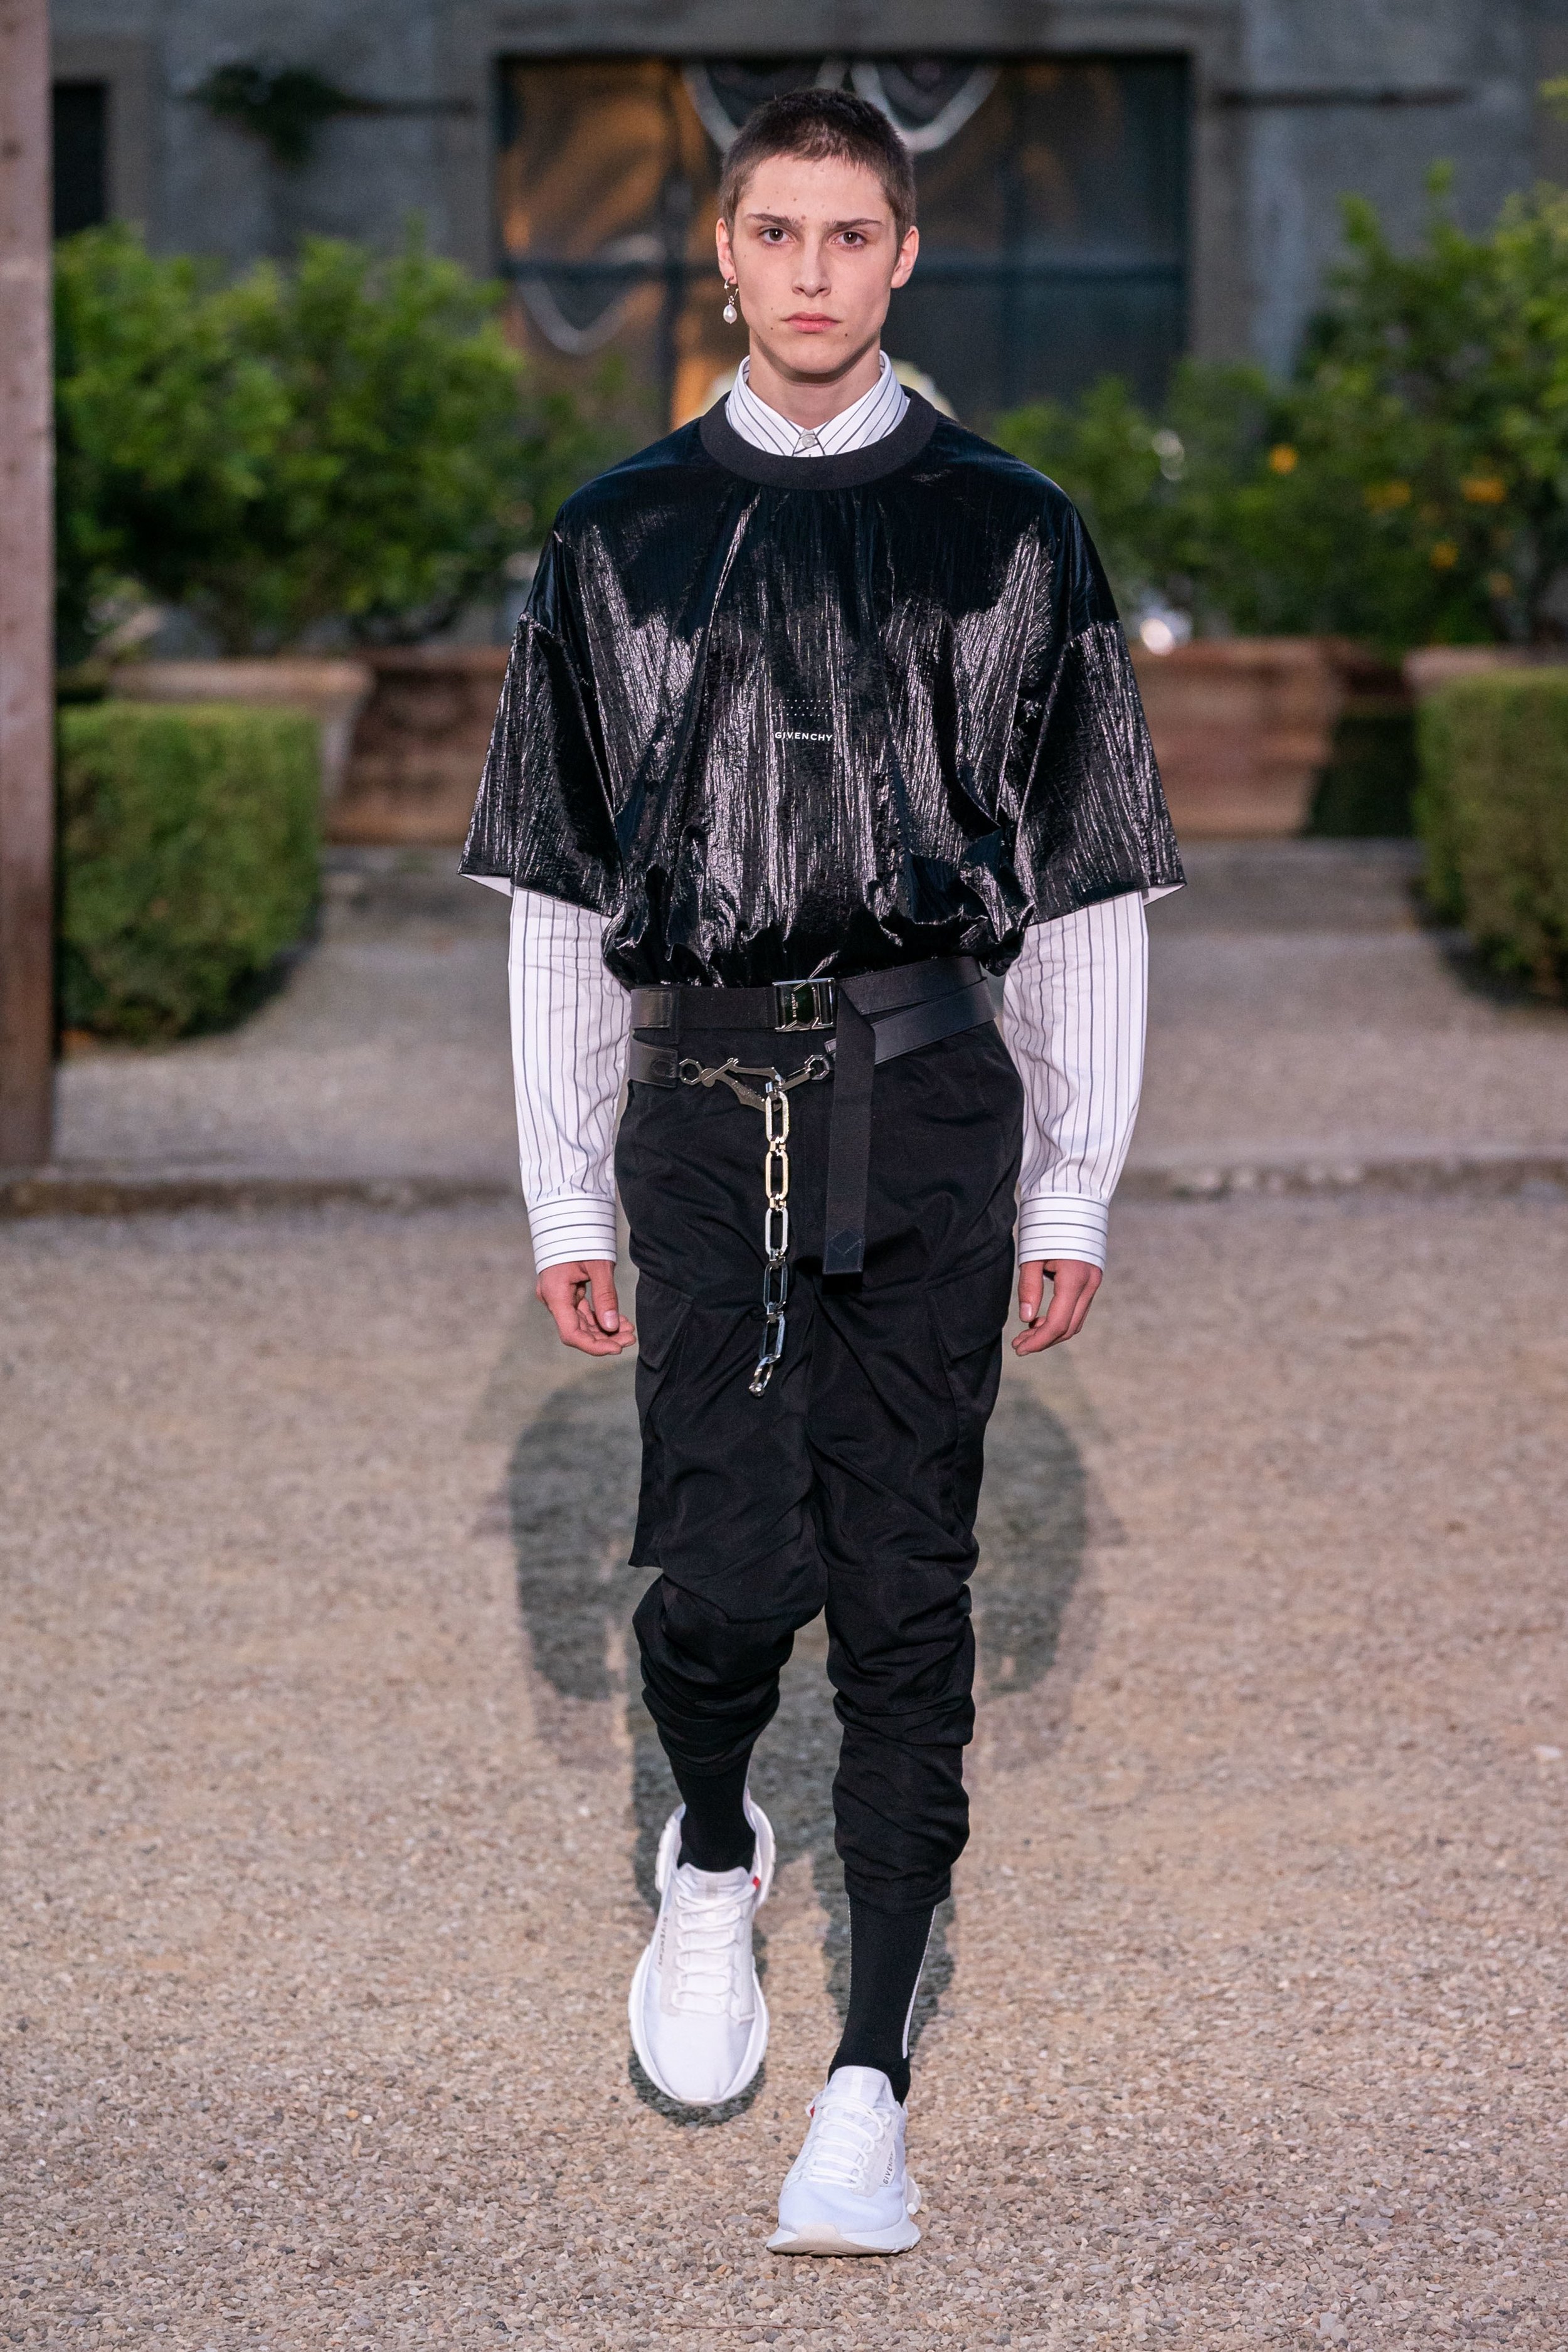 Behind_The_Blinds_Magazine_Givenchy_Men_SS20_Pitti_ALE0626.jpg